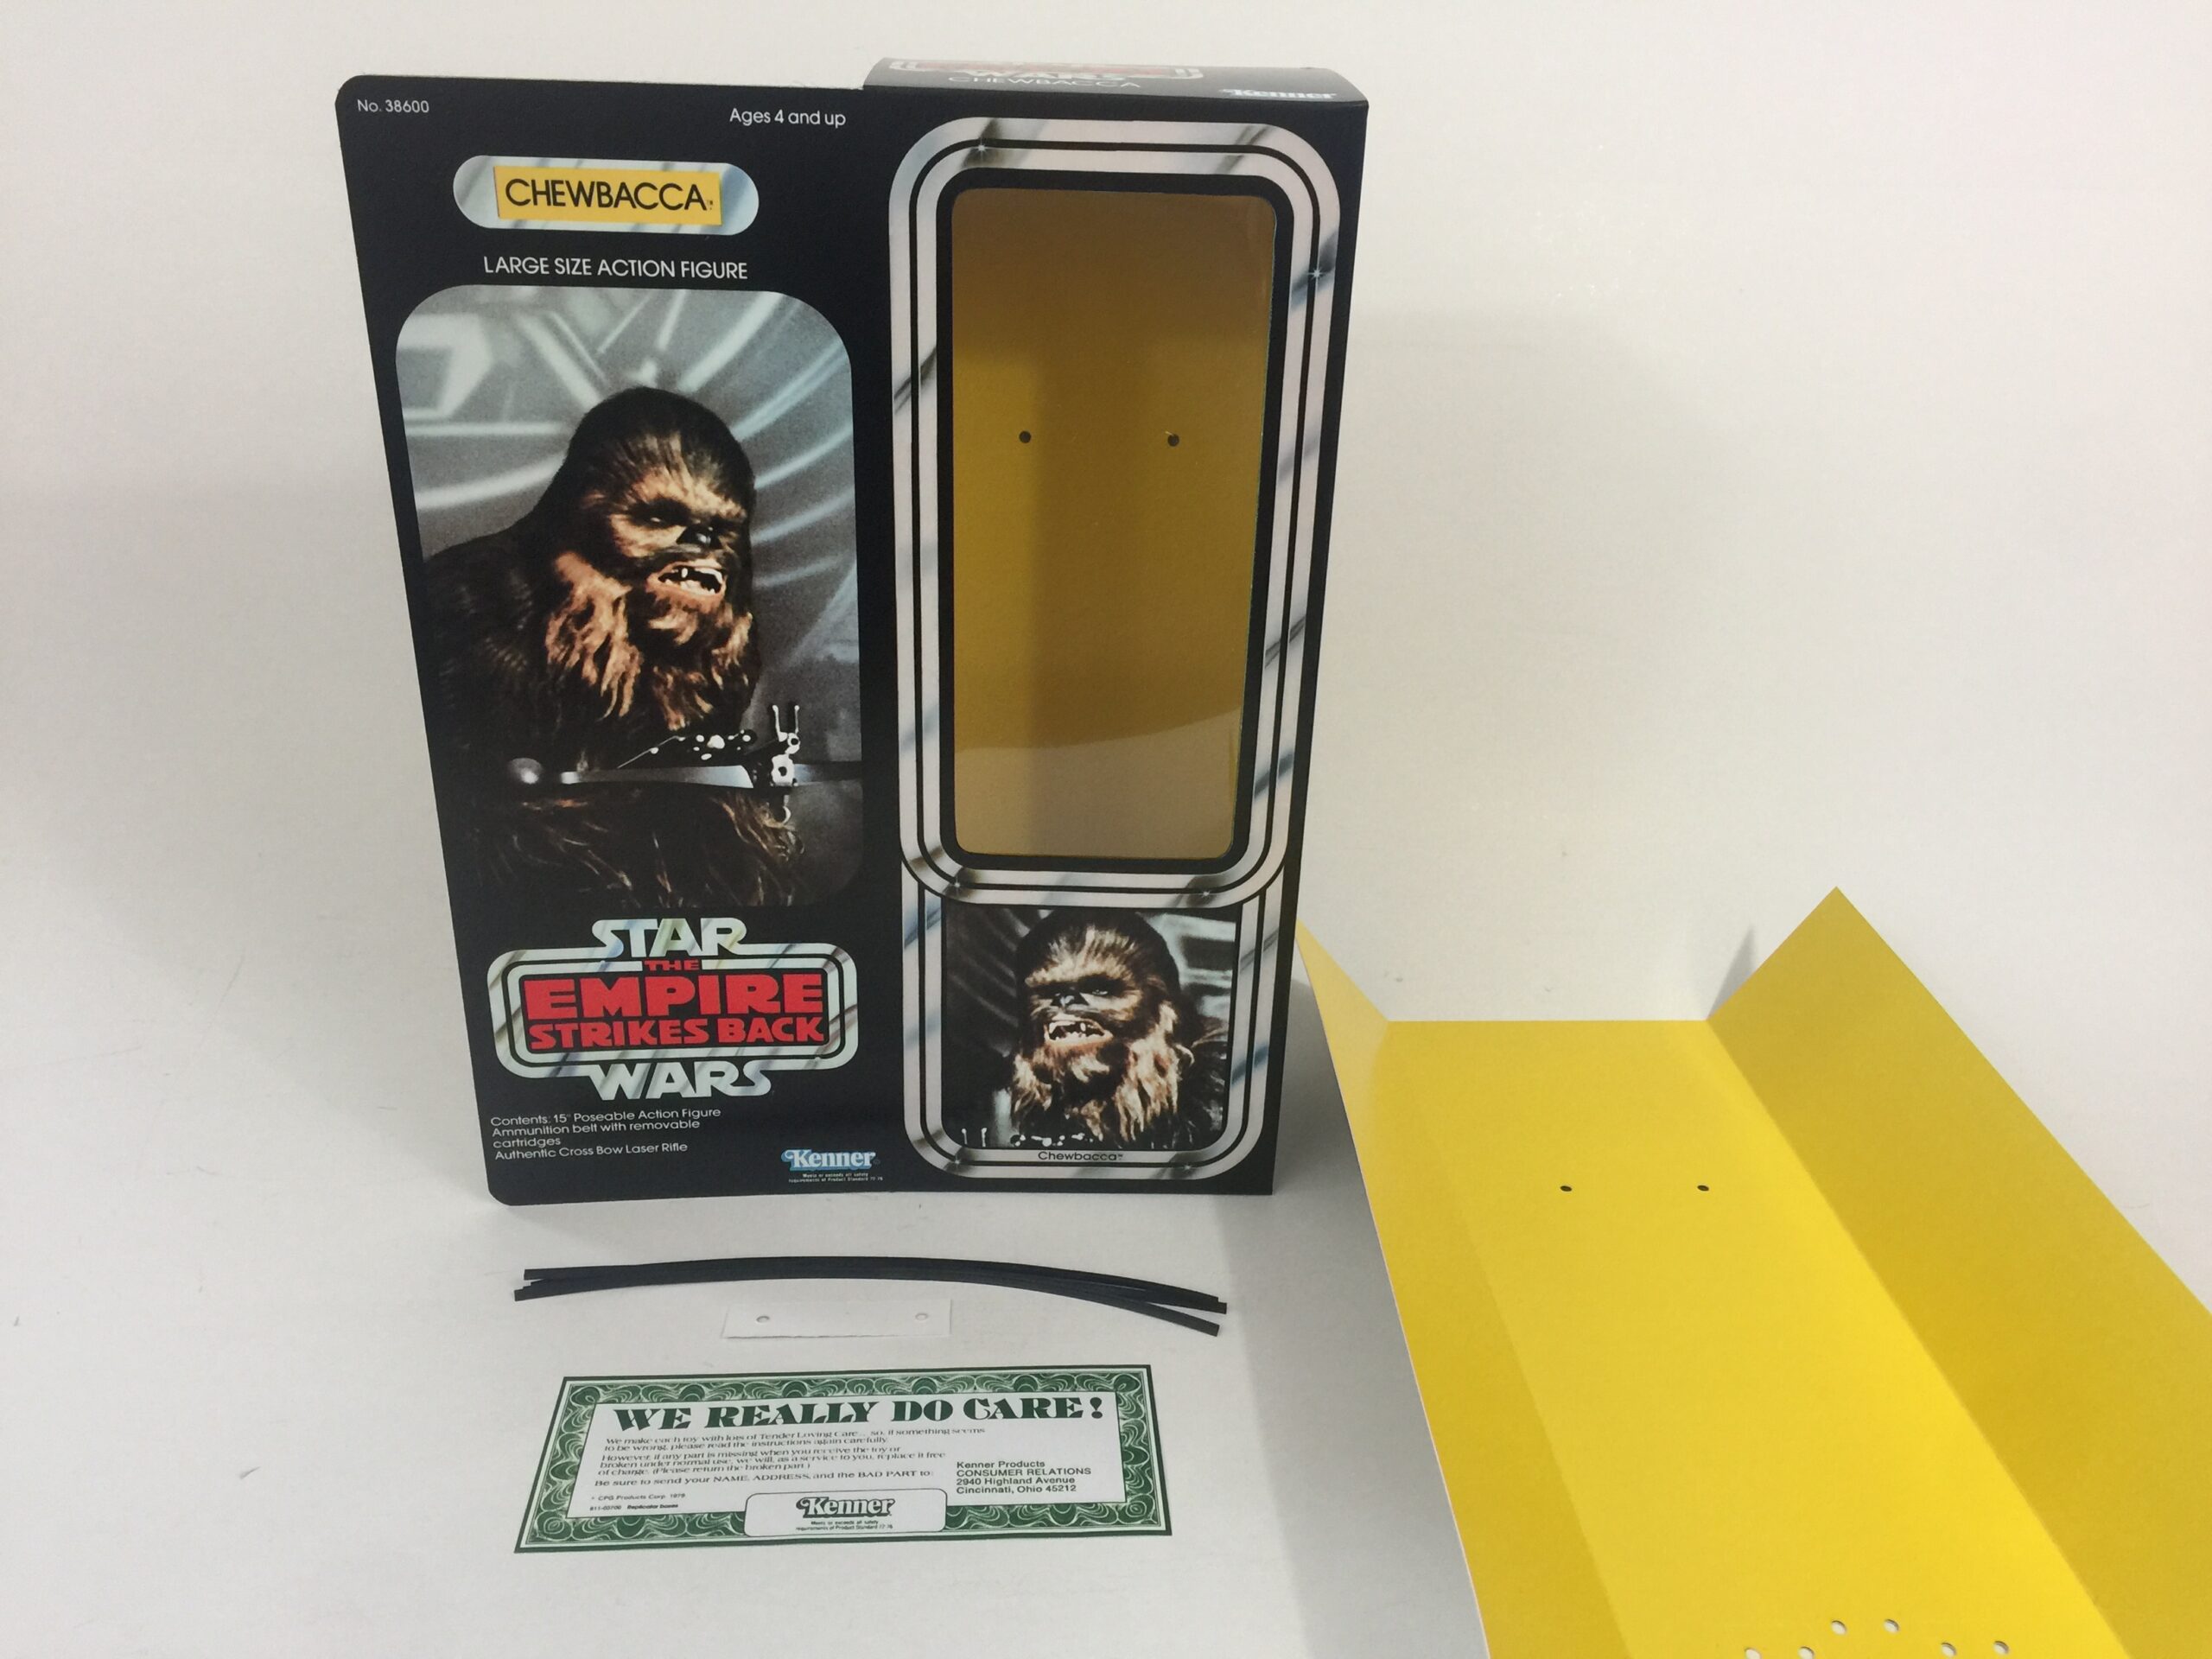 THE EMPIRE STRIKES BACK Chewbacca Repro Kenner Cardback STAR WARS 